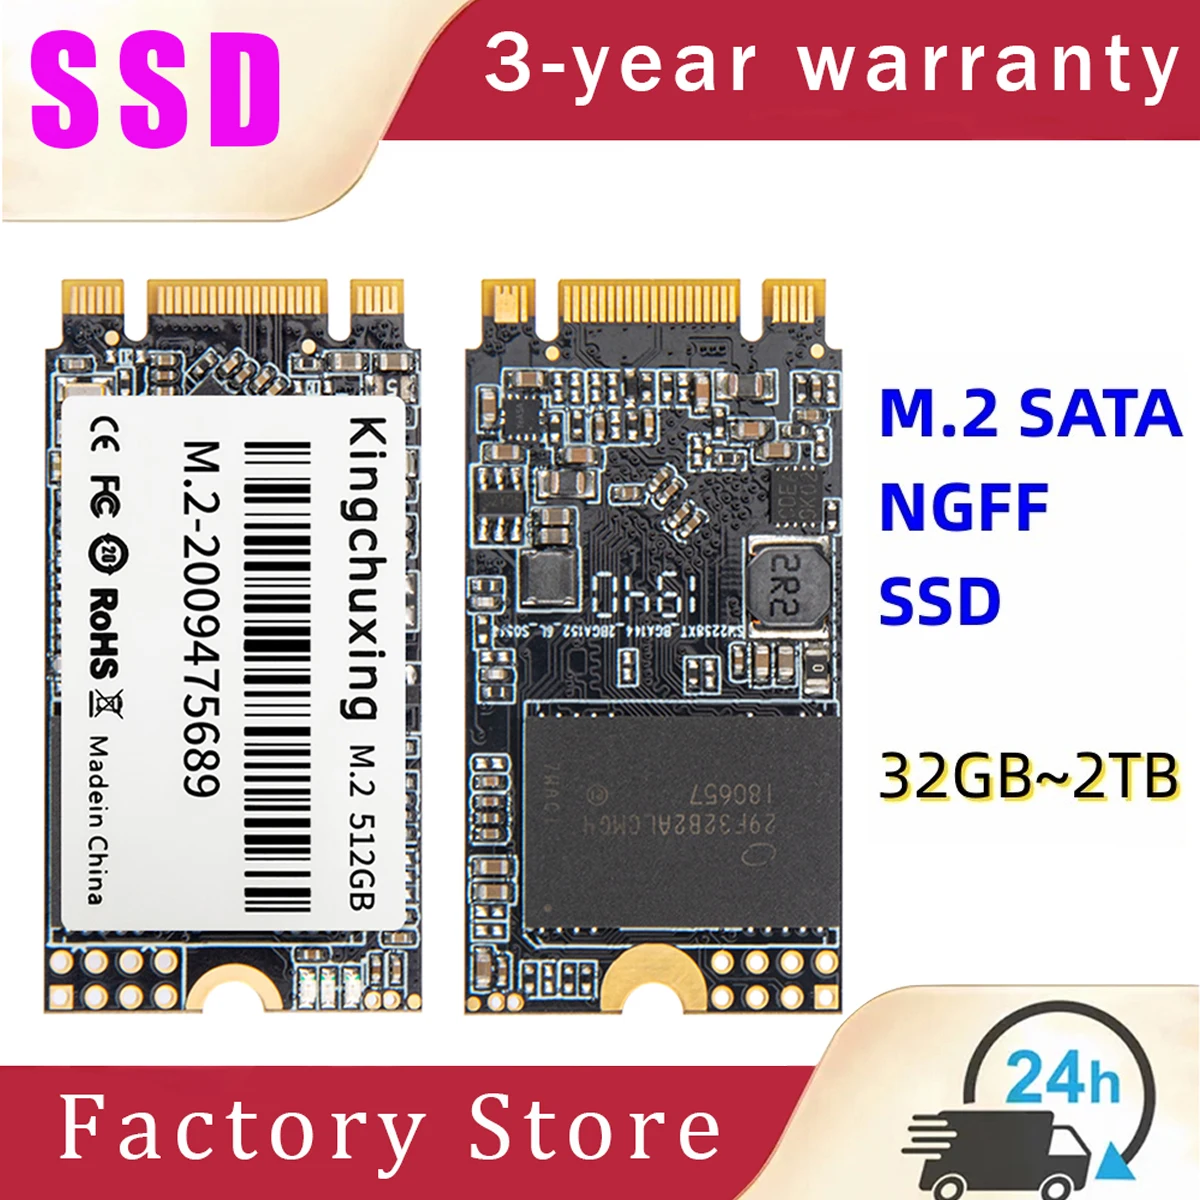 Cost-effective SSD 128gb M.2 NGFF 2242 256GB 512GB M.2 HD SSD NGFF 2280 1TB Internal Solid State Drives For Laptop Desktop SSD orico m 2 sata ssd 128gb 256gb 512gb 1tb m2 ngff ssd m 2 2280 mm internal solid state hard drive for desktop laptop